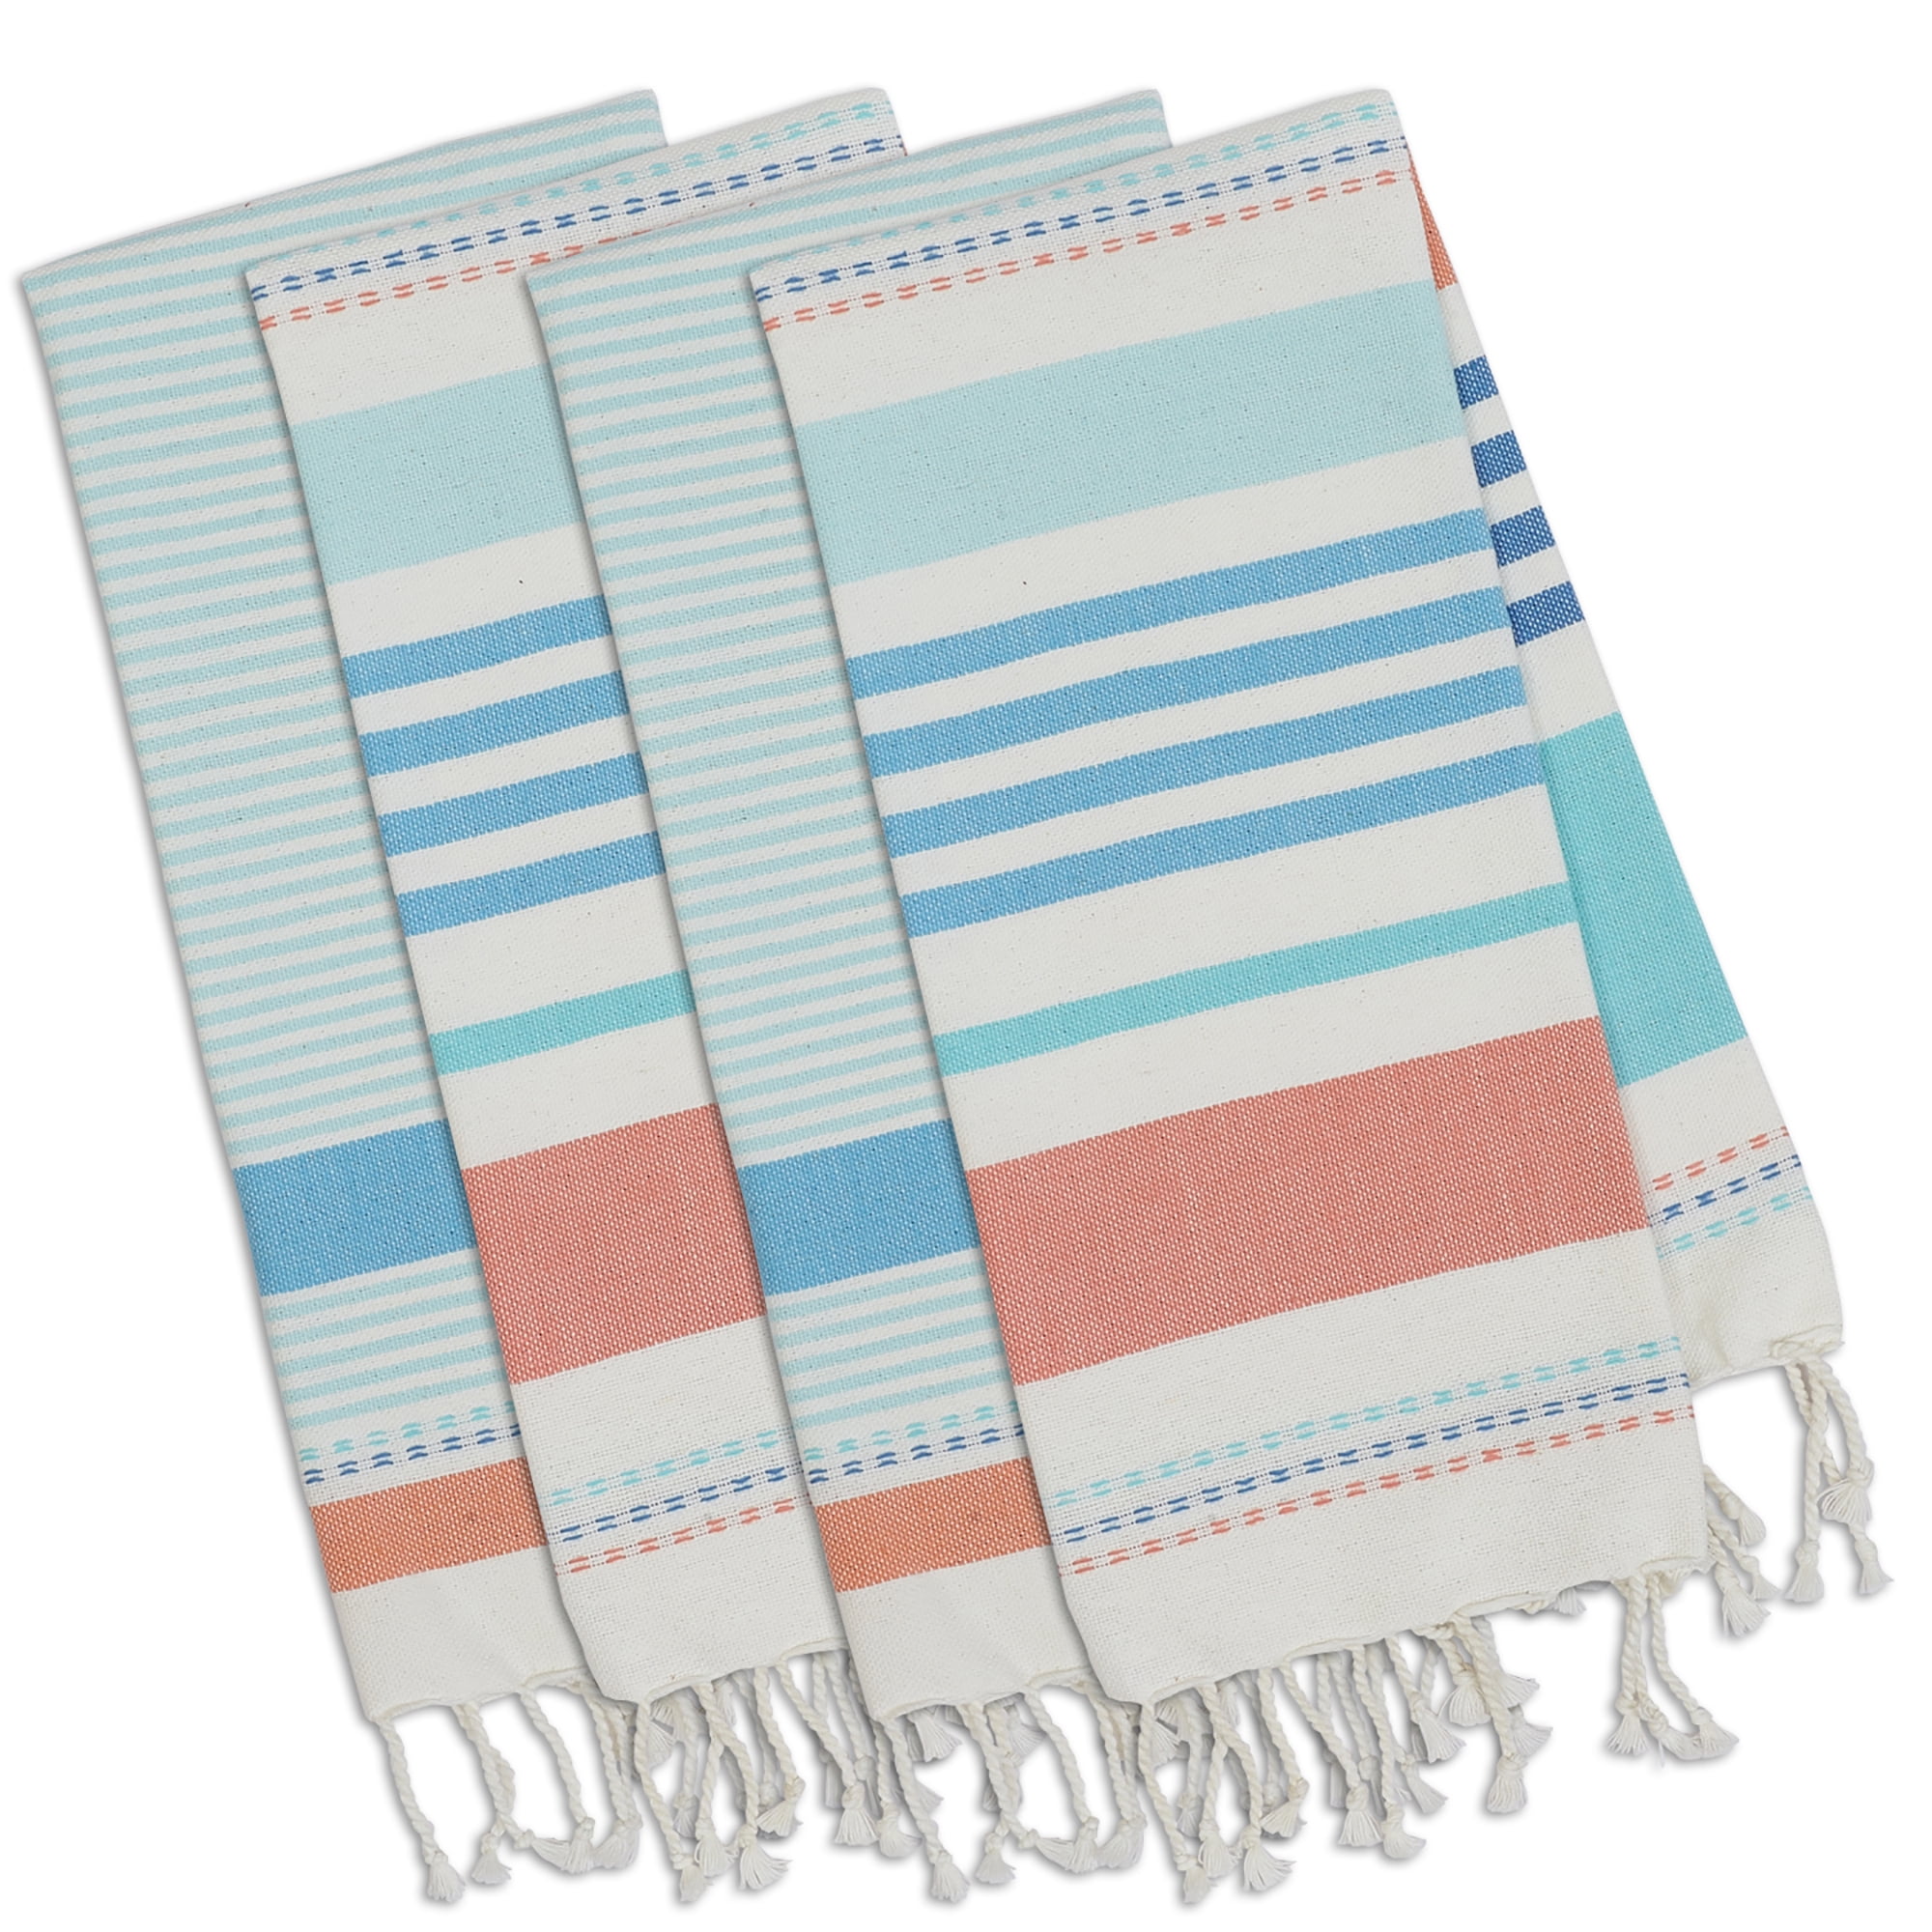 Details about   Seashell Kitchen Towel Nautical Style 100% Cotton Blue and Tan Mainstays 15x25" 